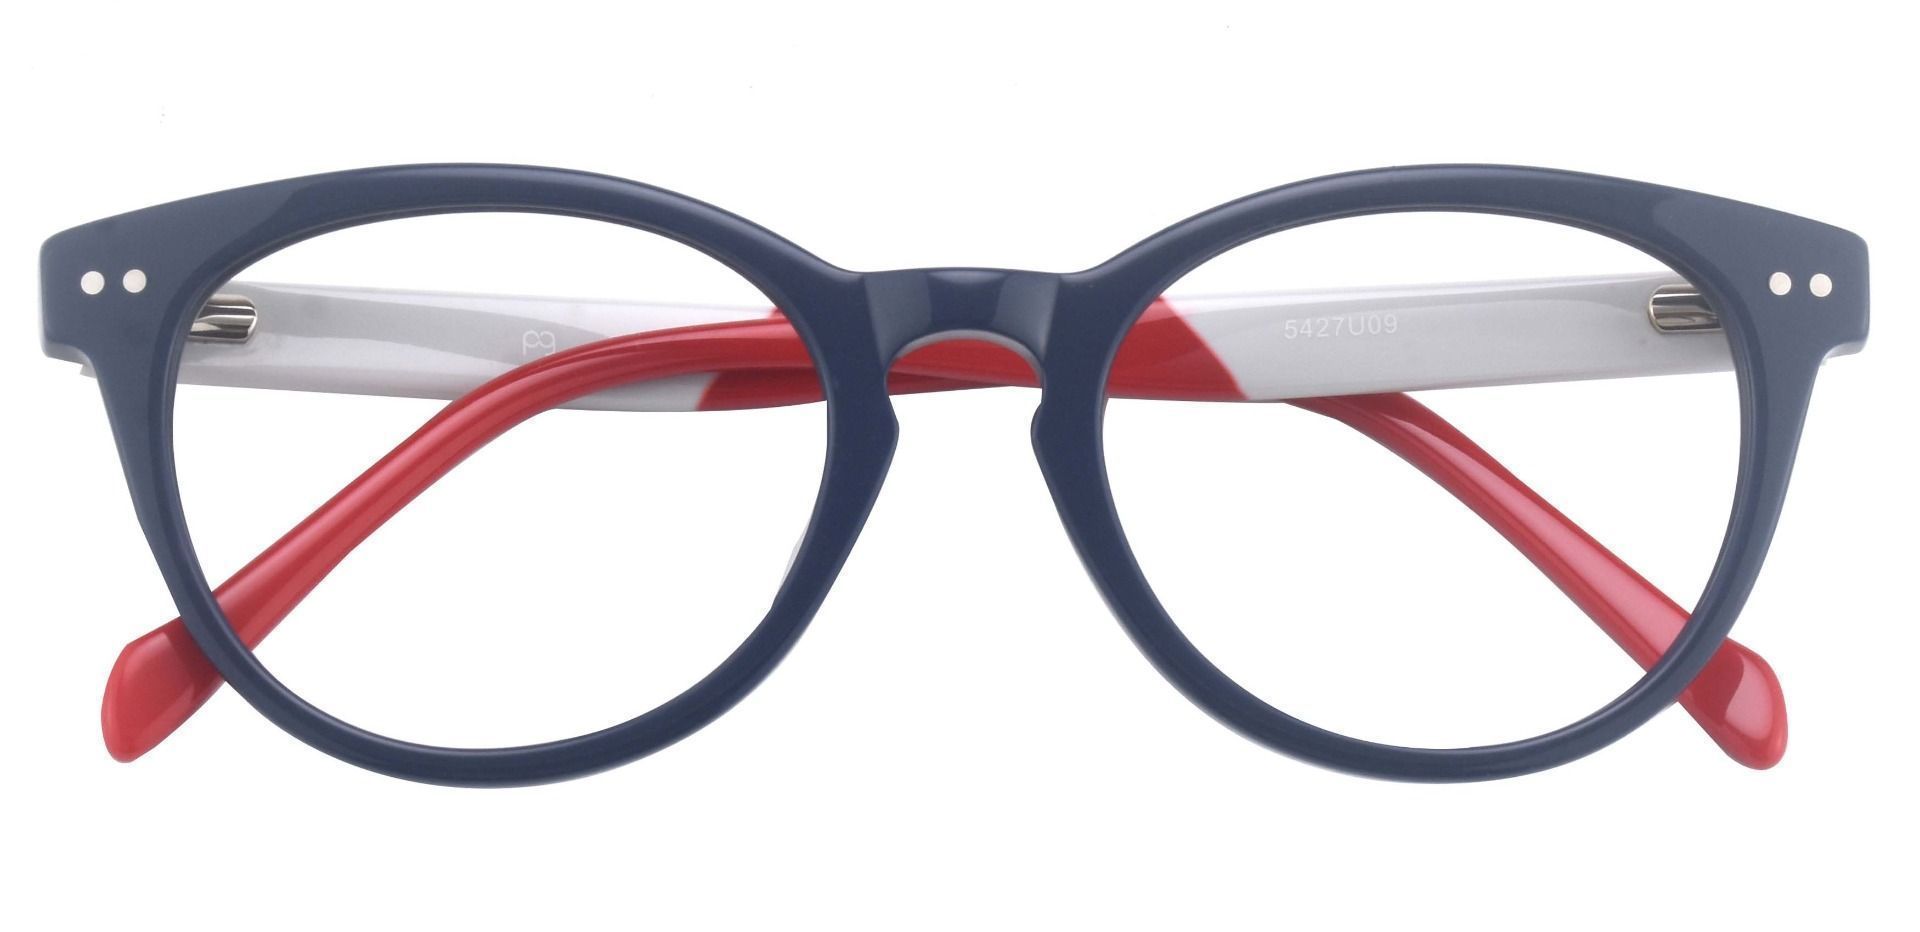 Revere Oval Blue Light Blocking Glasses - The Frame Is Blue And Red